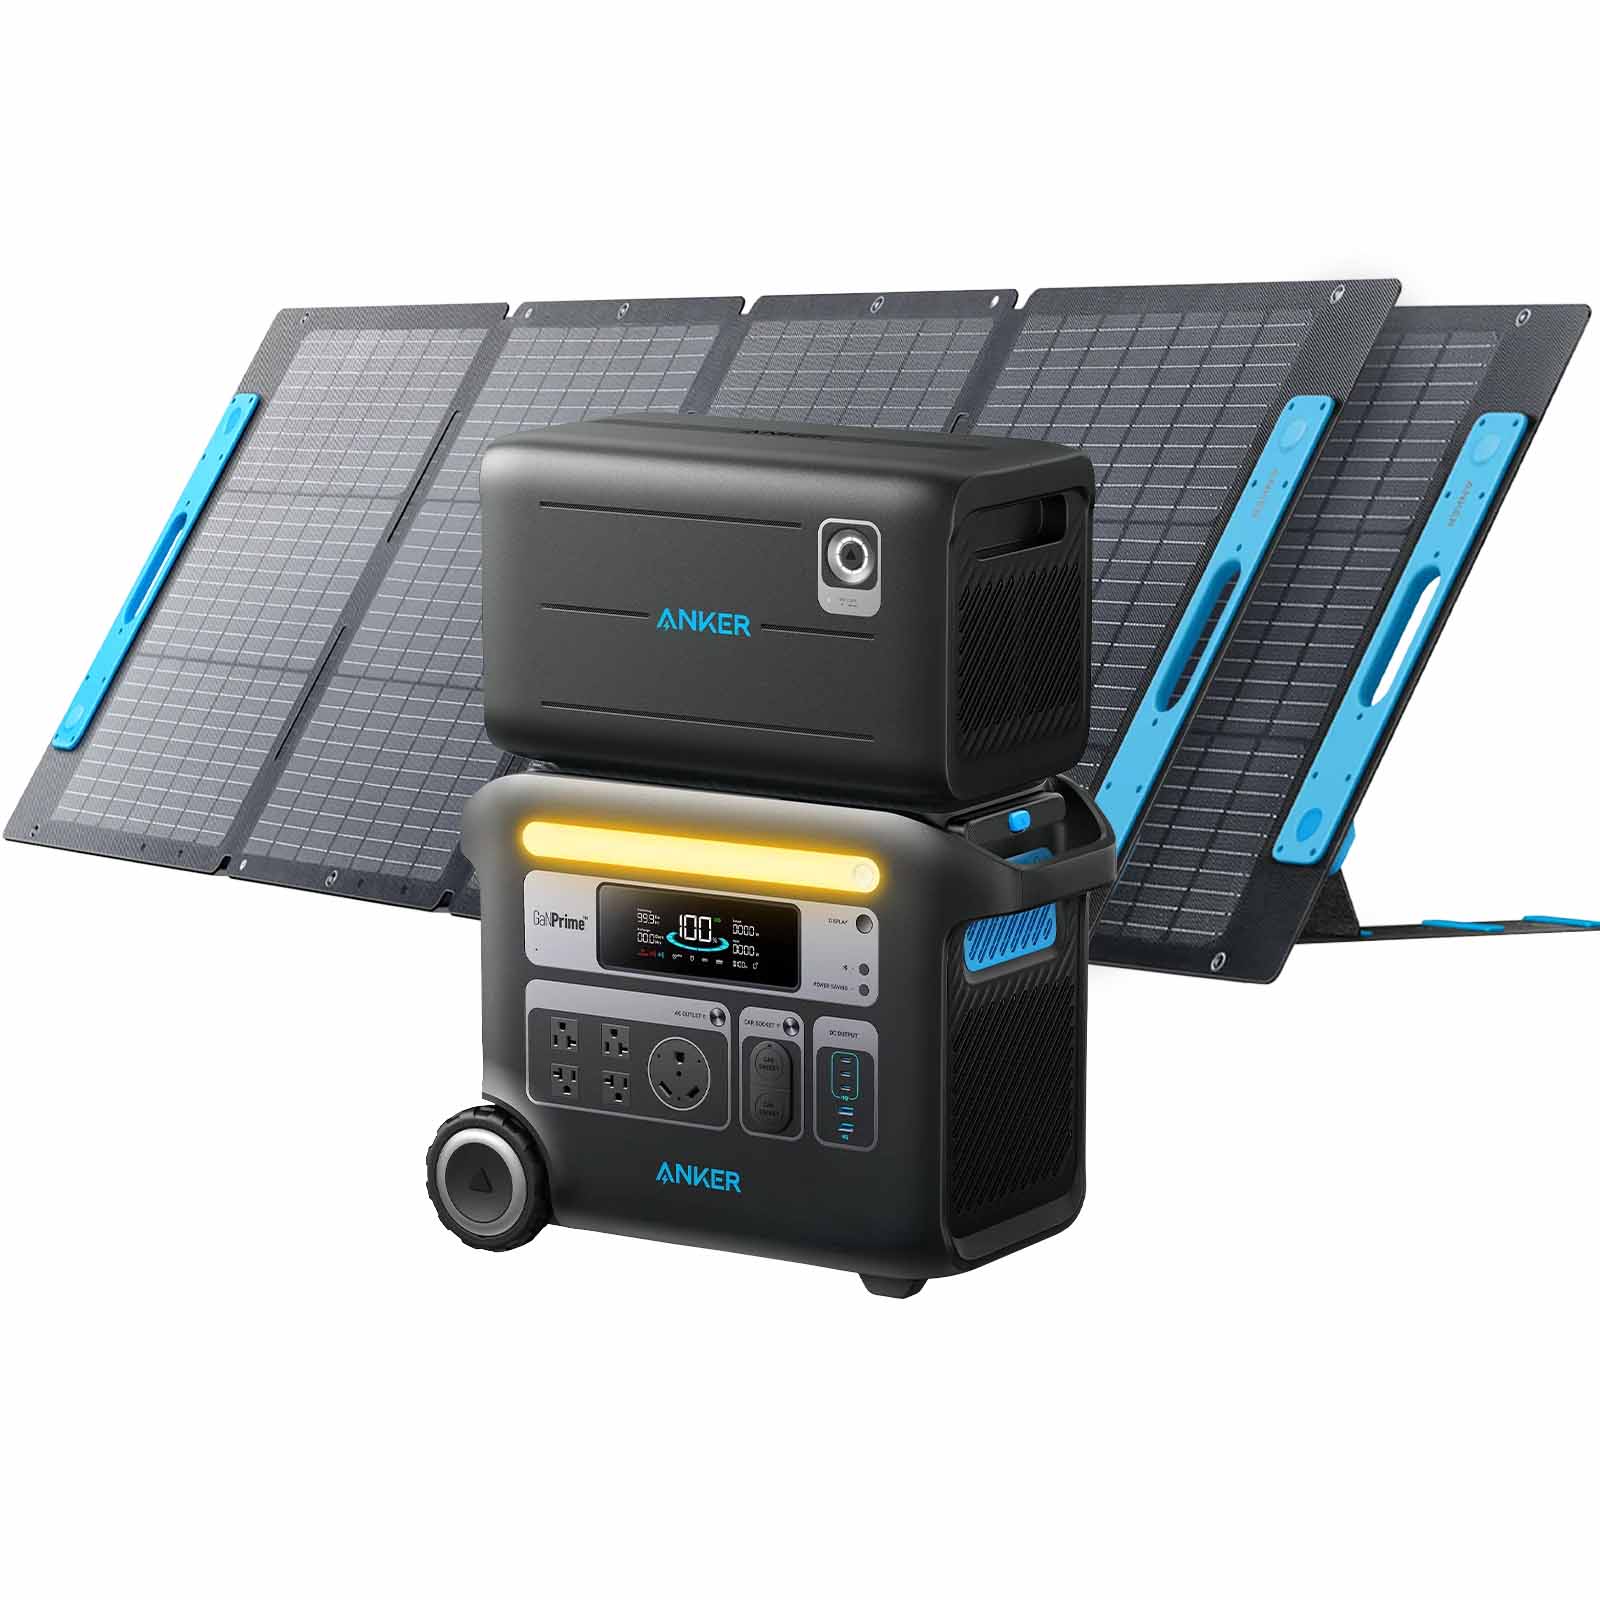 Anker Solar Generator 767 And Expansion Battery + 2 200W Solar Panels